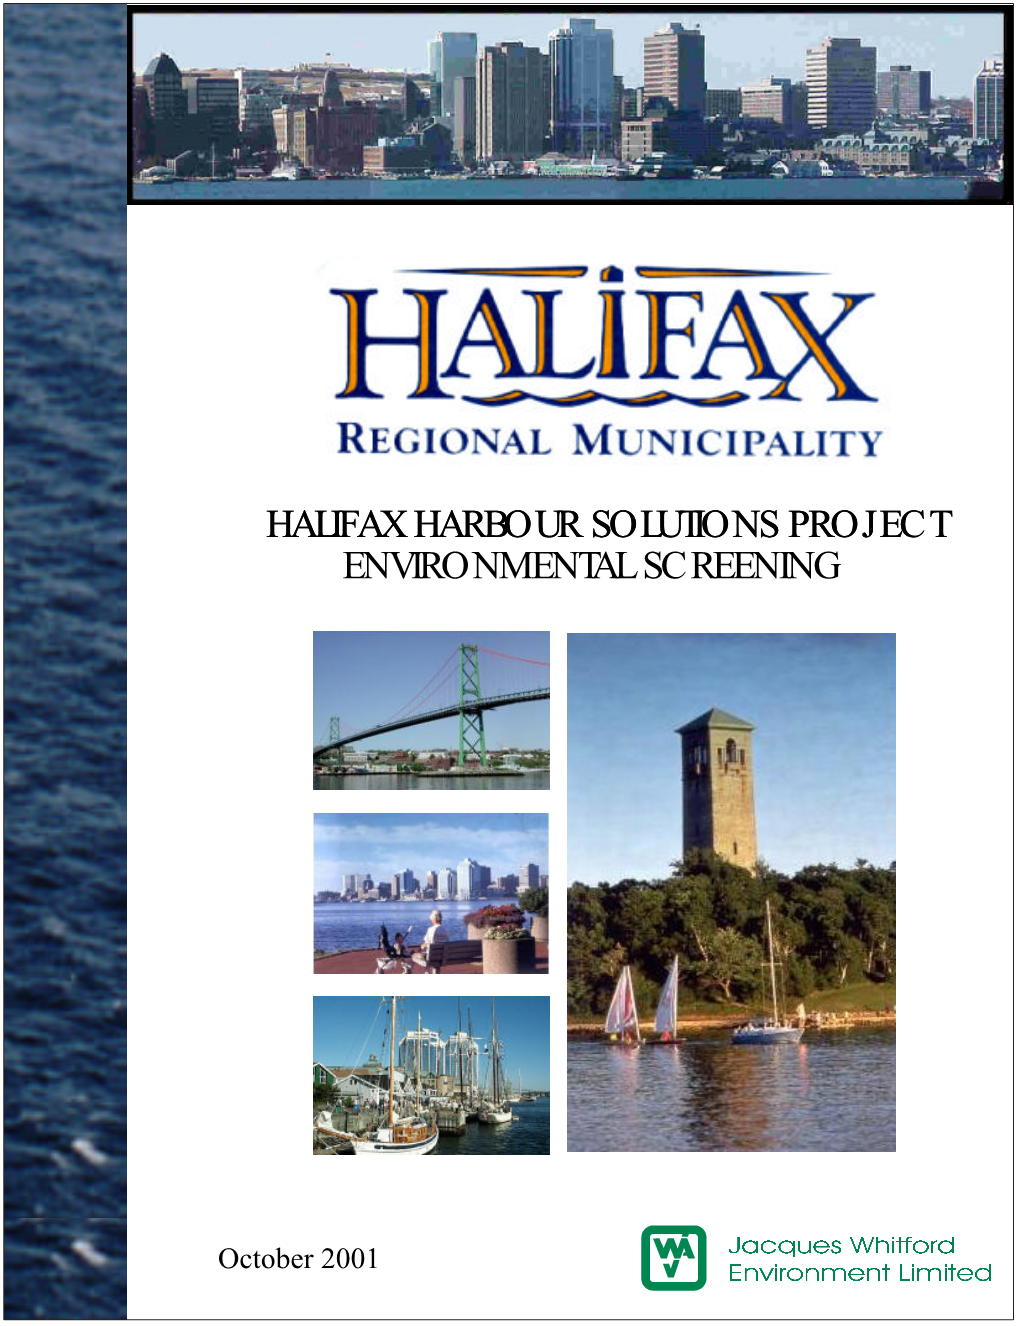 Halifax Harbour Solutions Project Environmental Screening Report